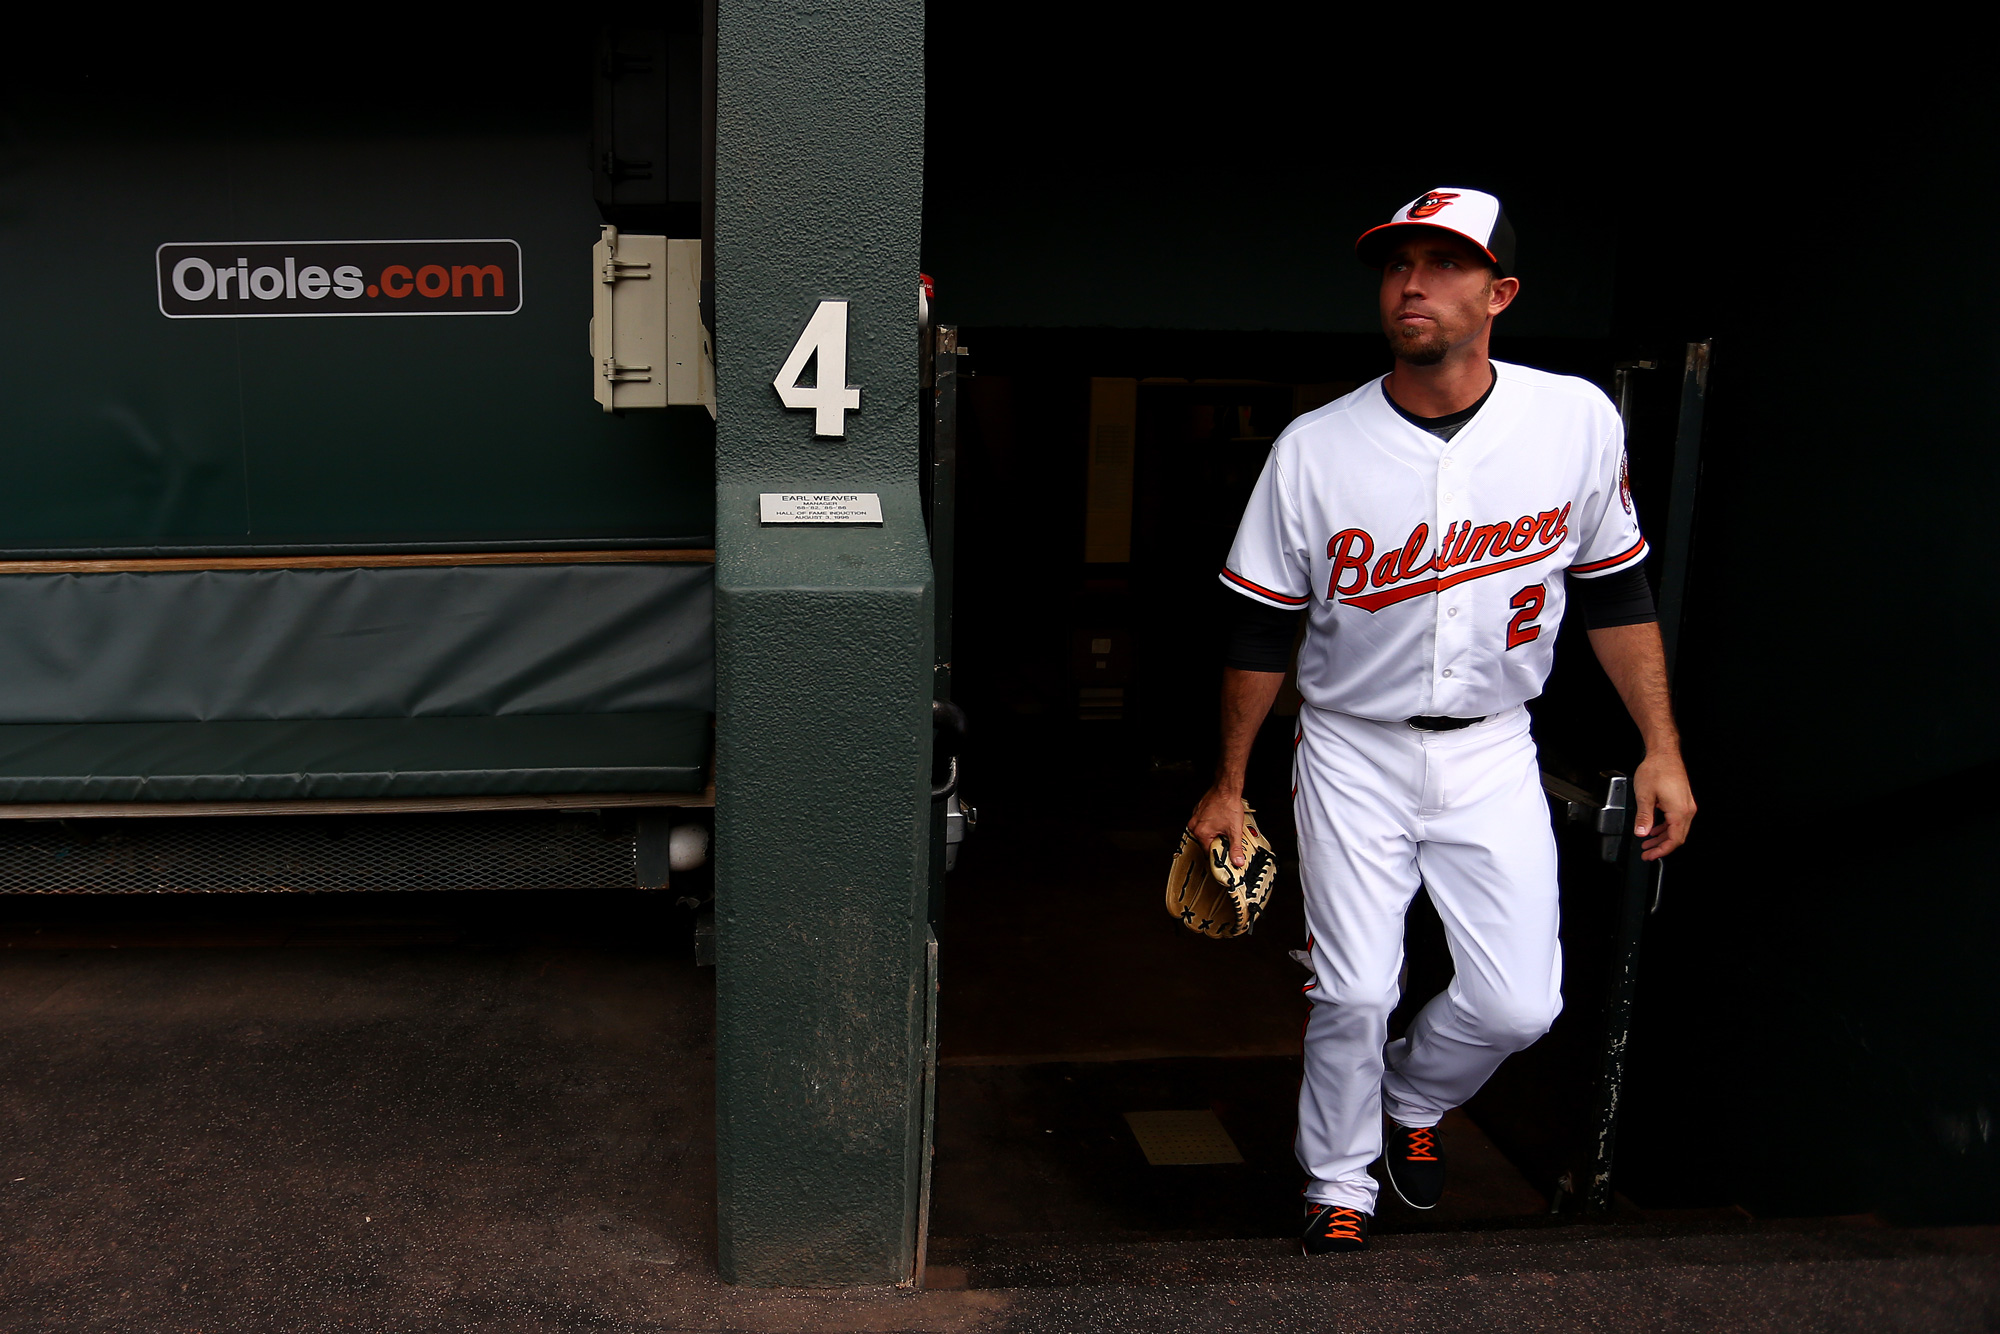  Shortstop J.J Hardy #2 of the Baltimore Orioles exits the dugout before the game against the Toronto Blue Jays at Oriole Park at Camden Yards on May 11, 2015 in Baltimore, Maryland. 